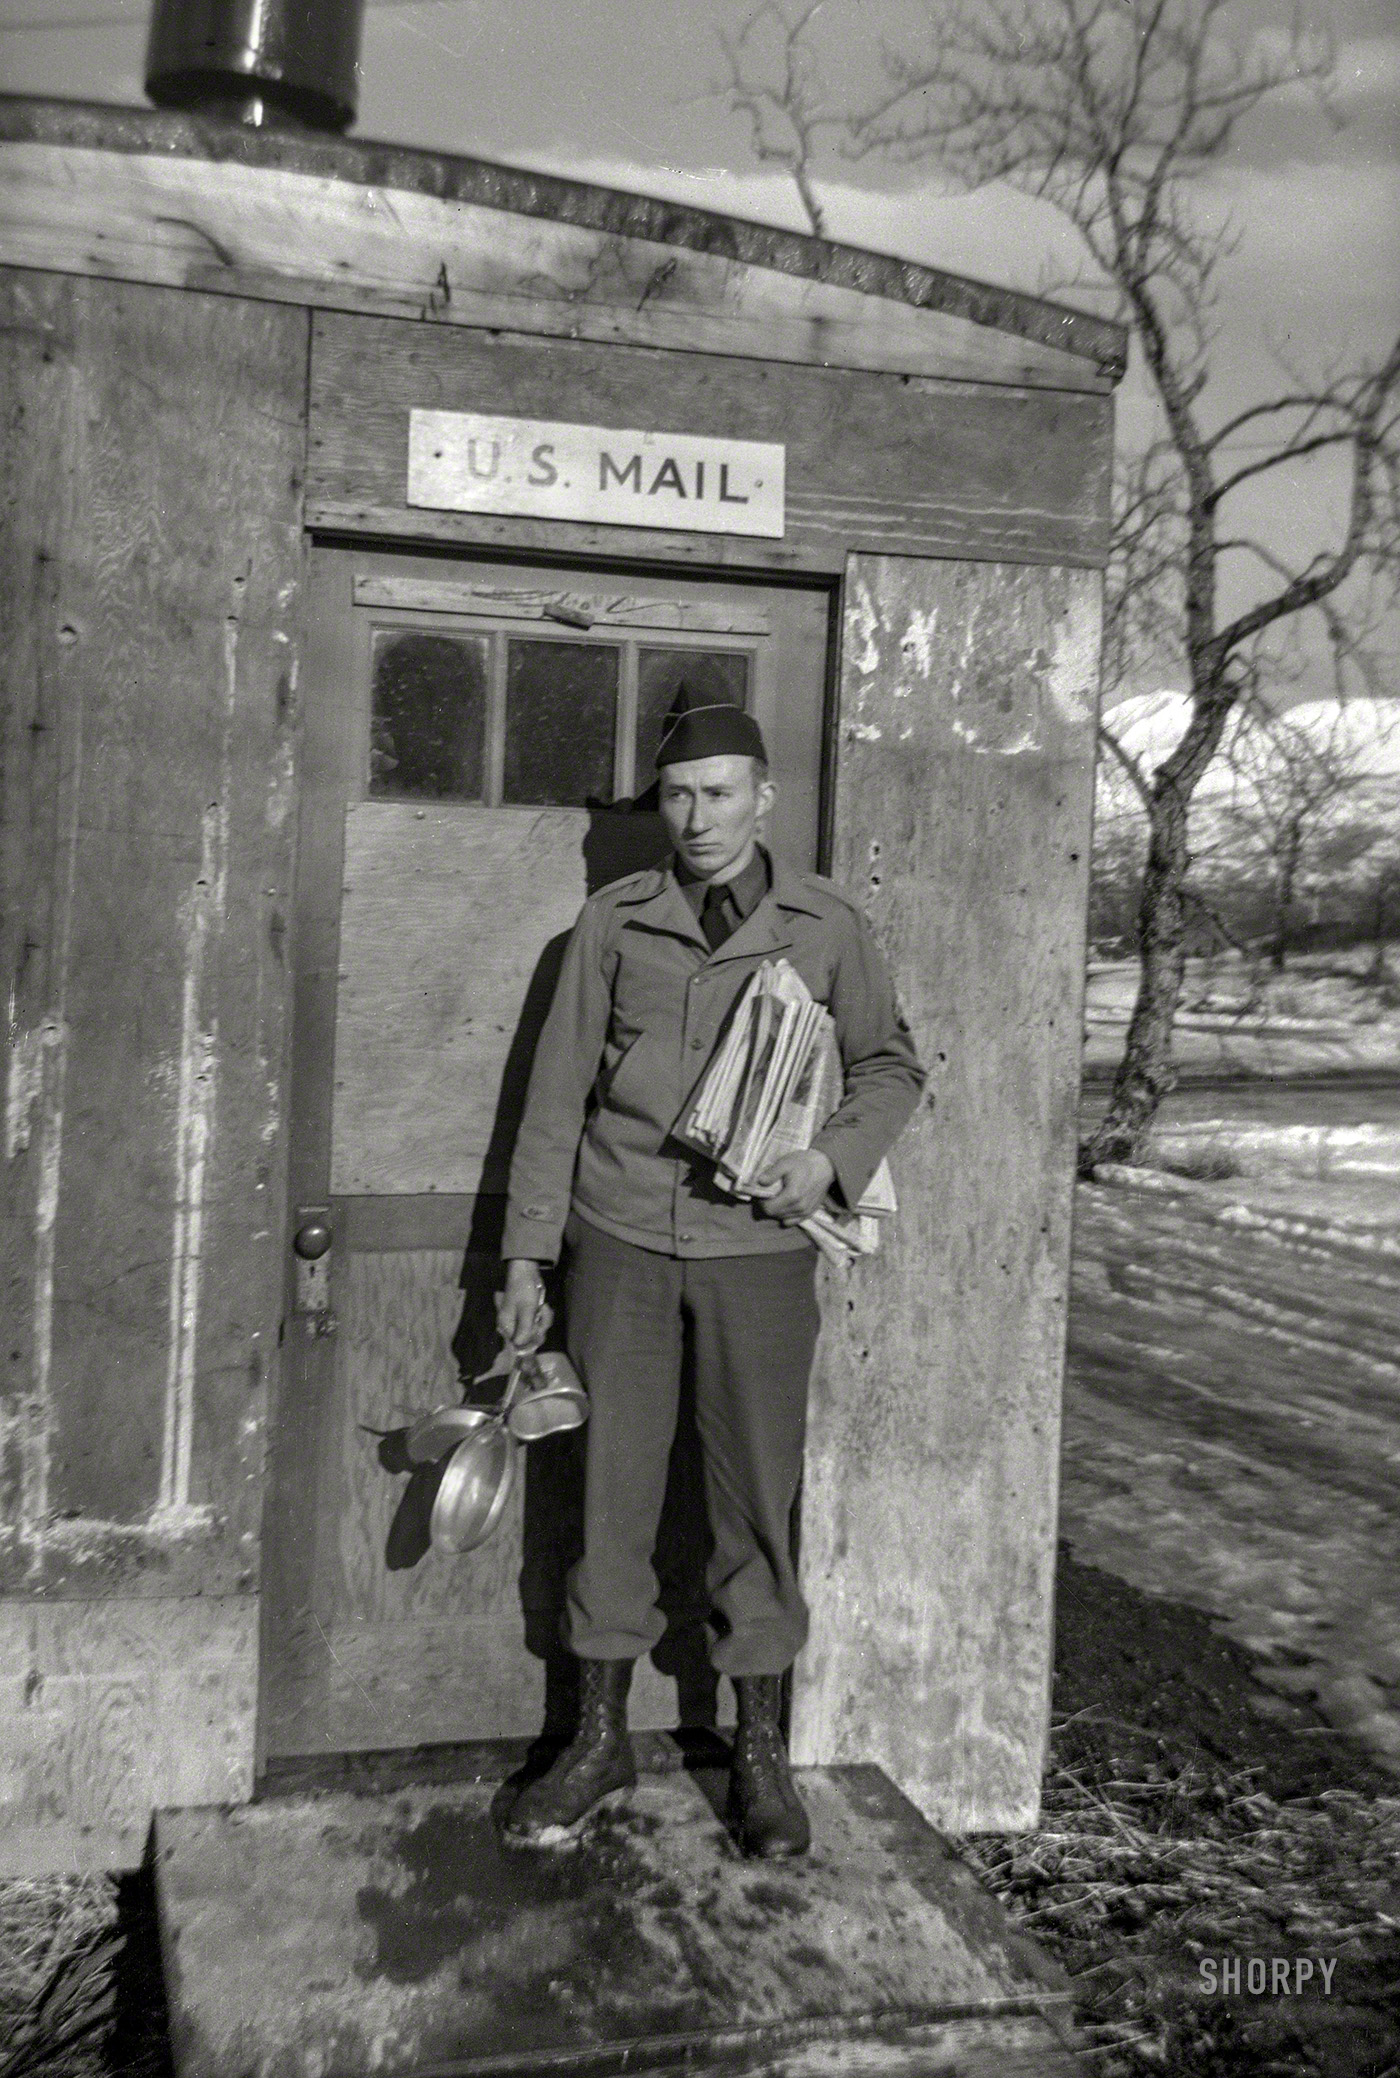 Circa 1942. "Alaska Defense Command. At mail shack with mess kit." And now to catch up on the news! 120 film negative from an estate sale. View full size.